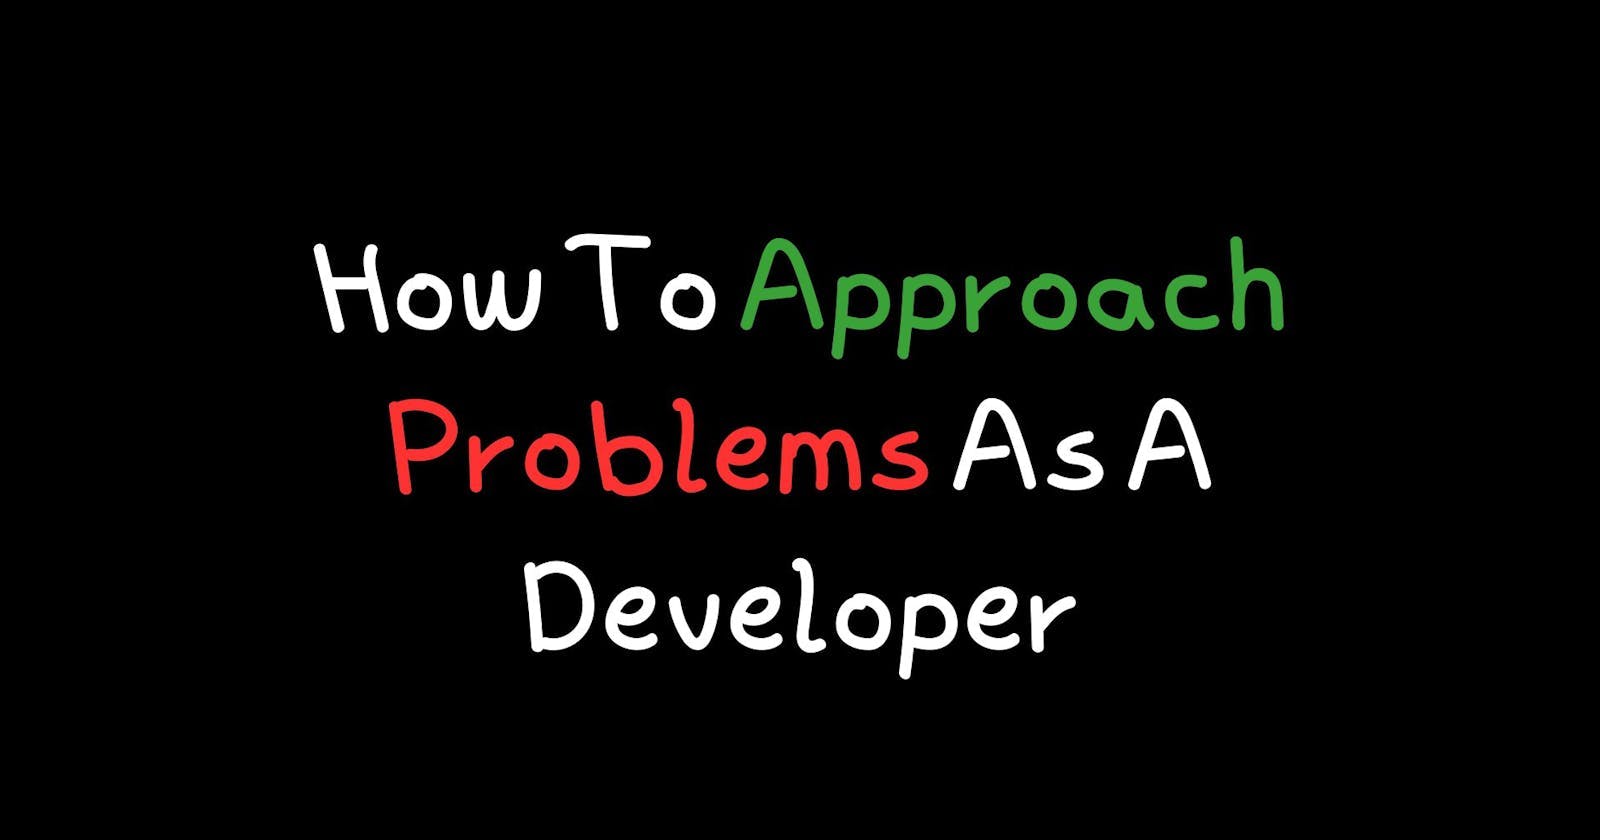 How To Approach Problems As A Developer